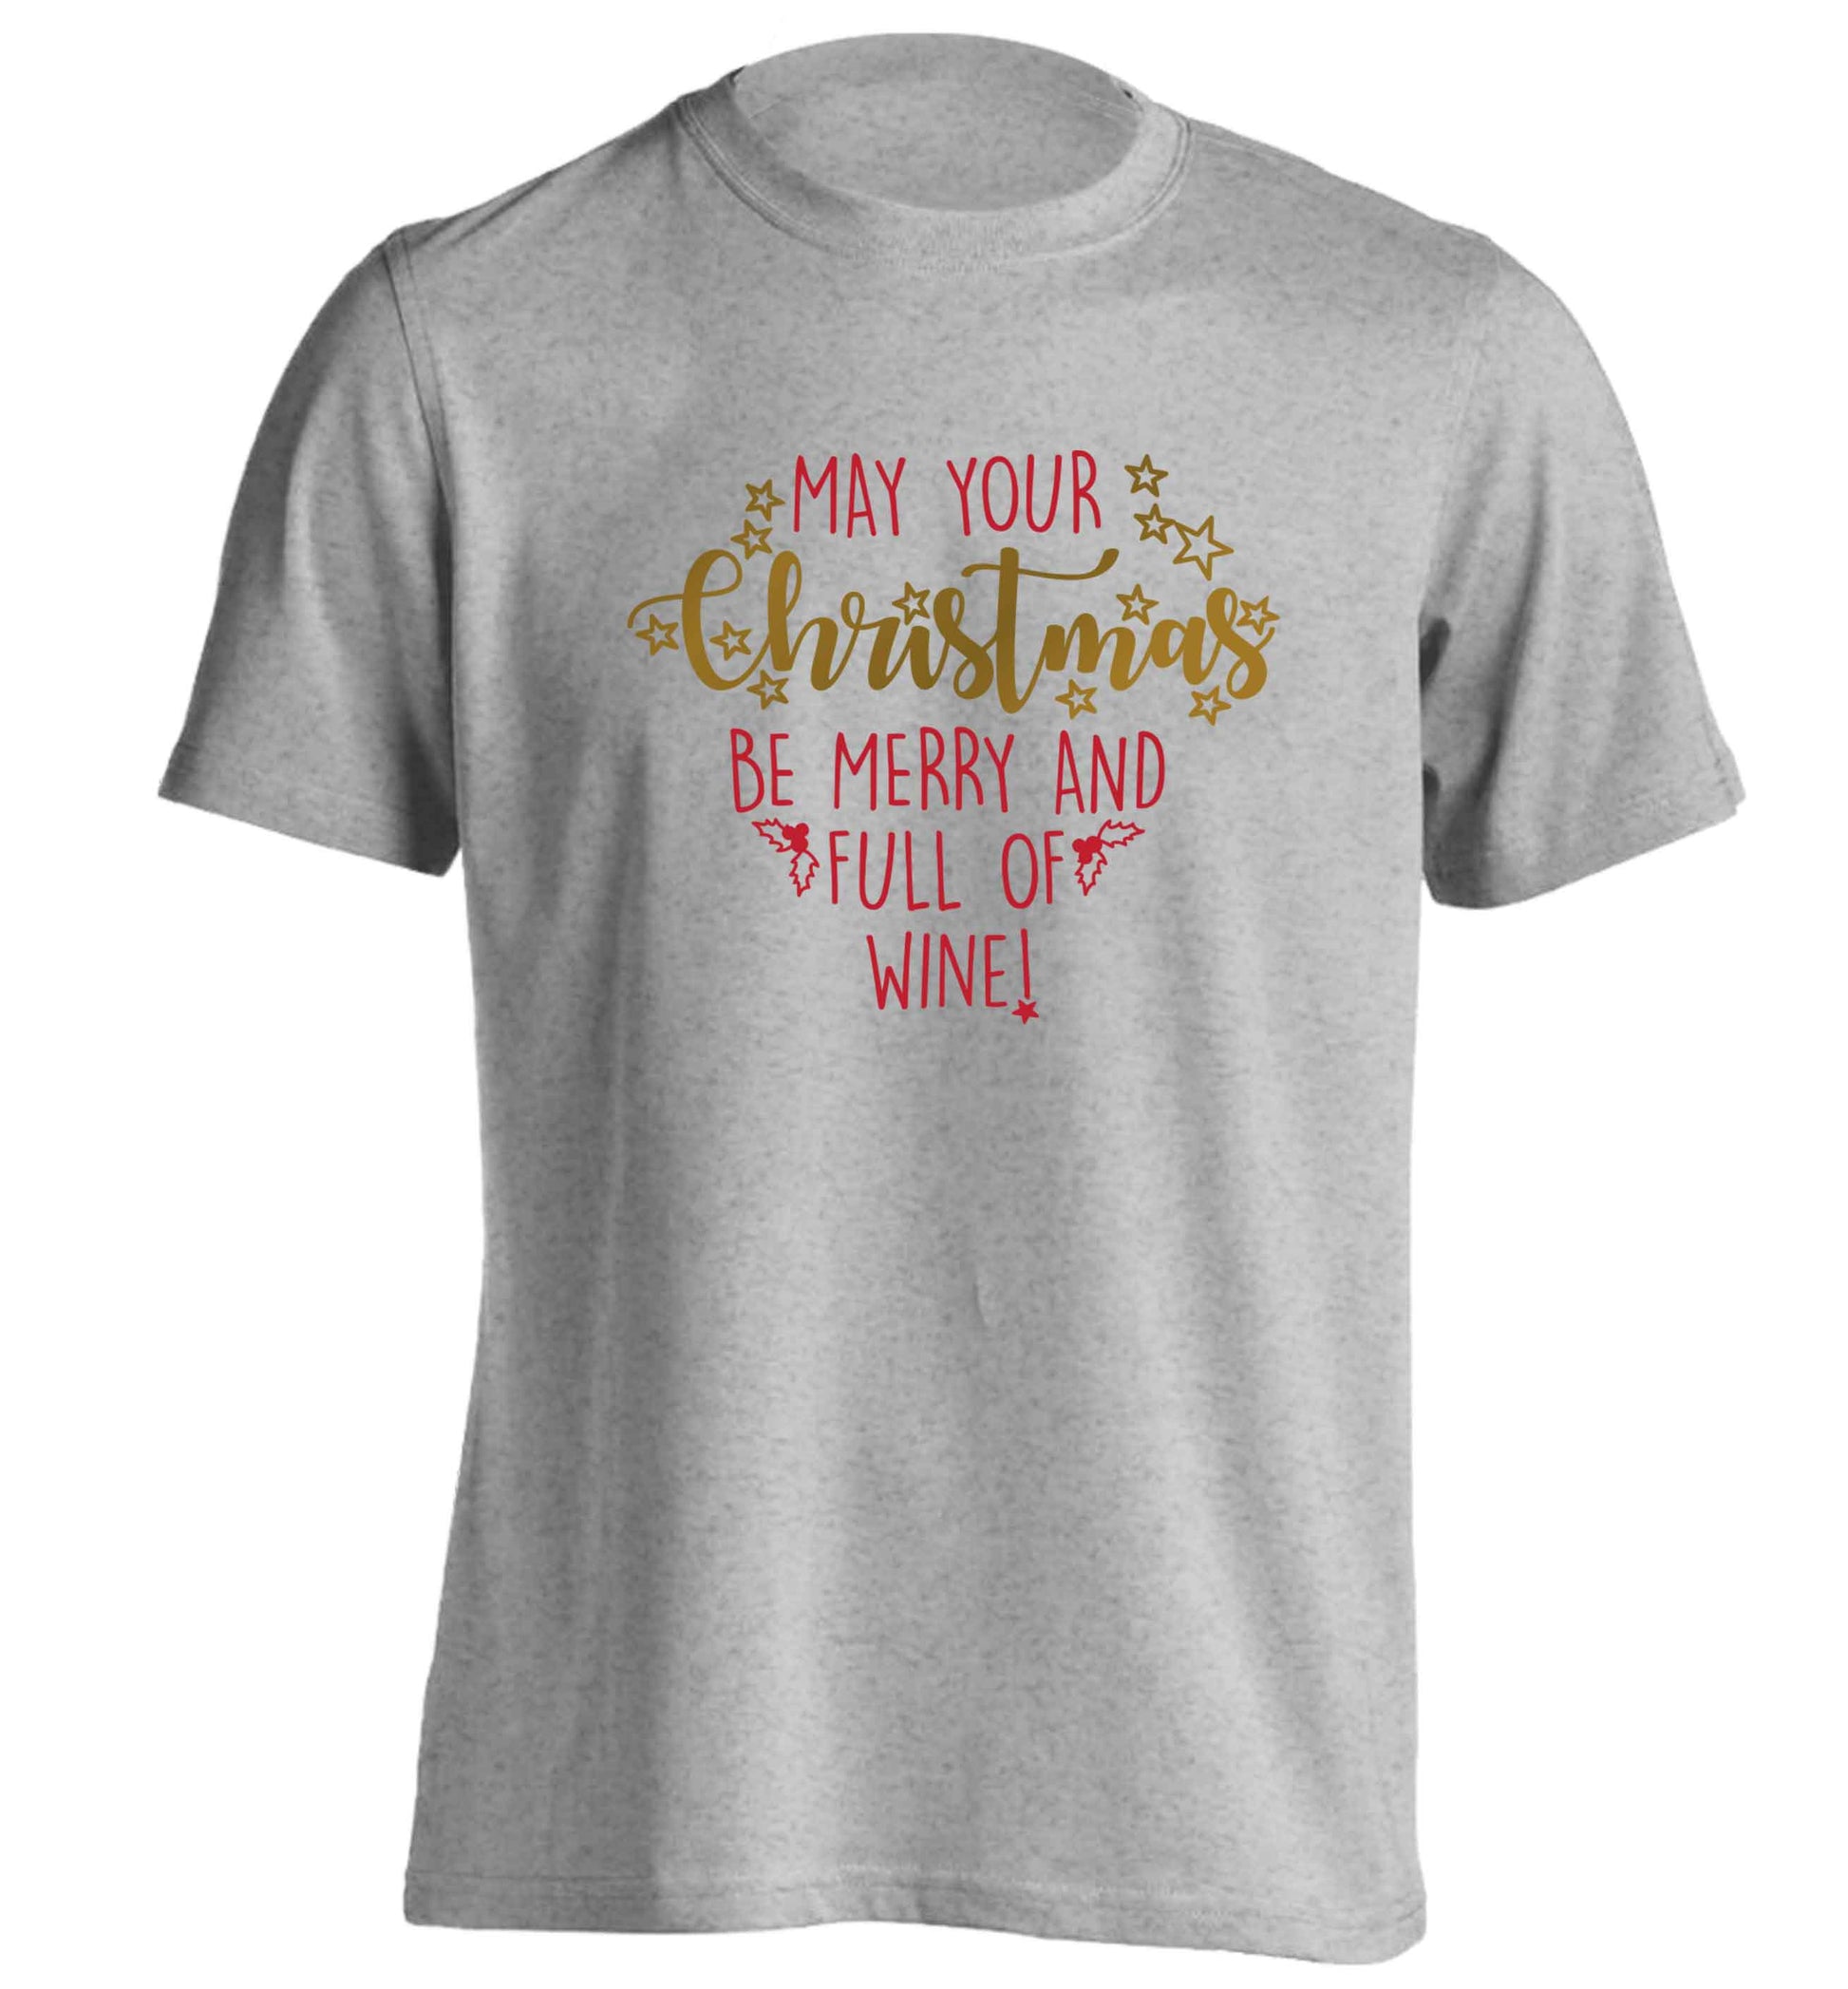 May your Christmas be merry and full of wine adults unisex grey Tshirt 2XL